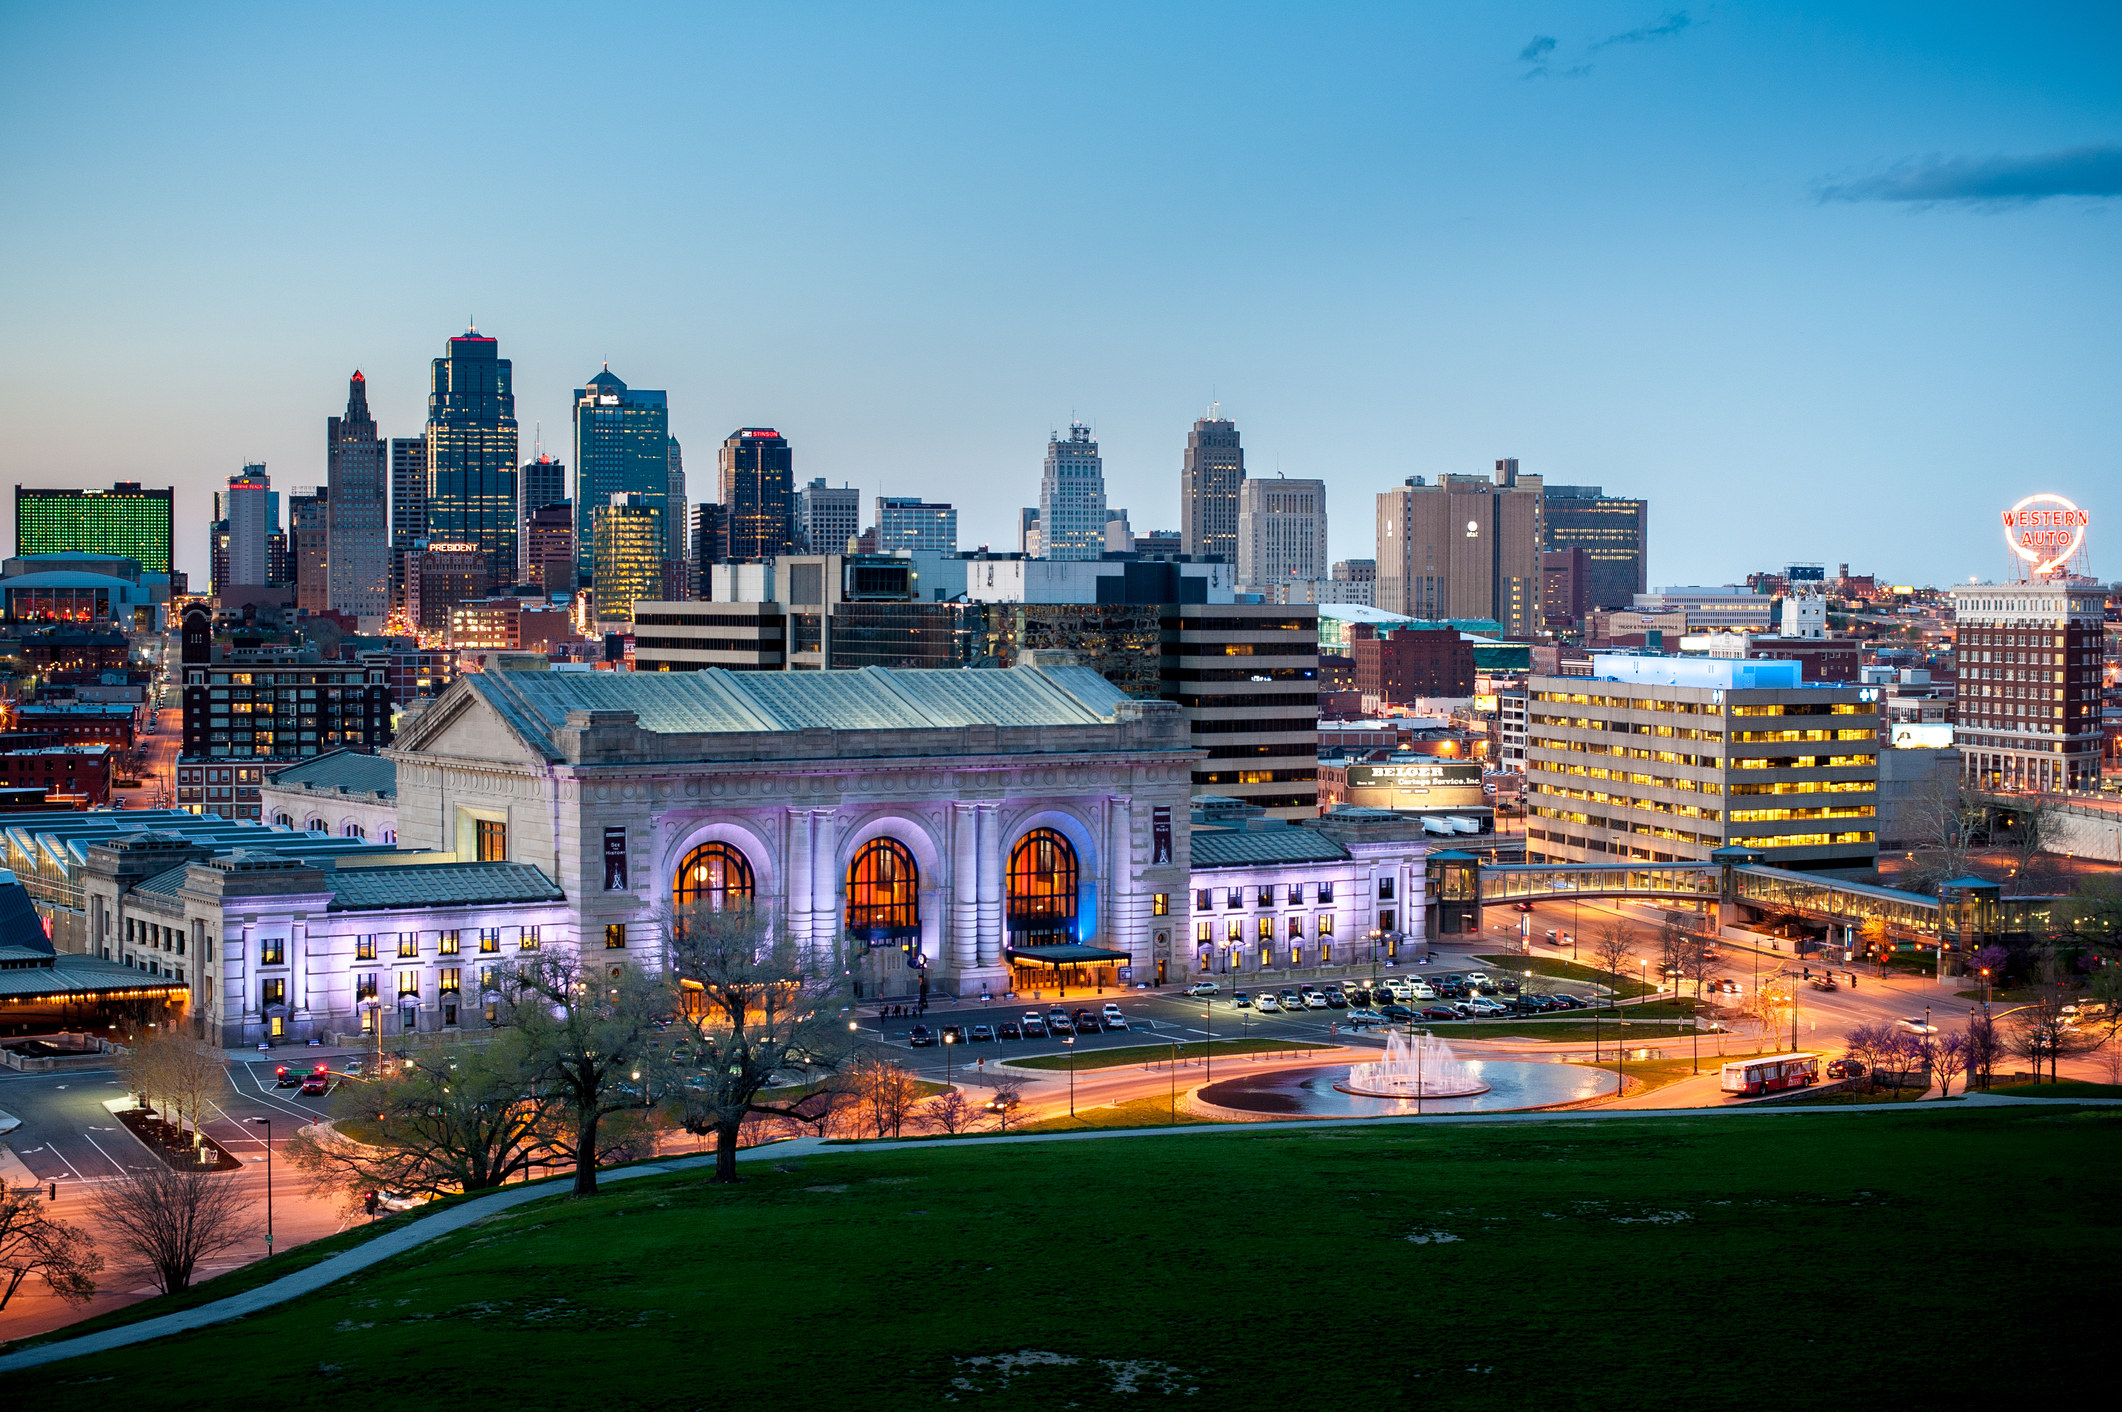 Union Station and downtown Kansas City at dusk.